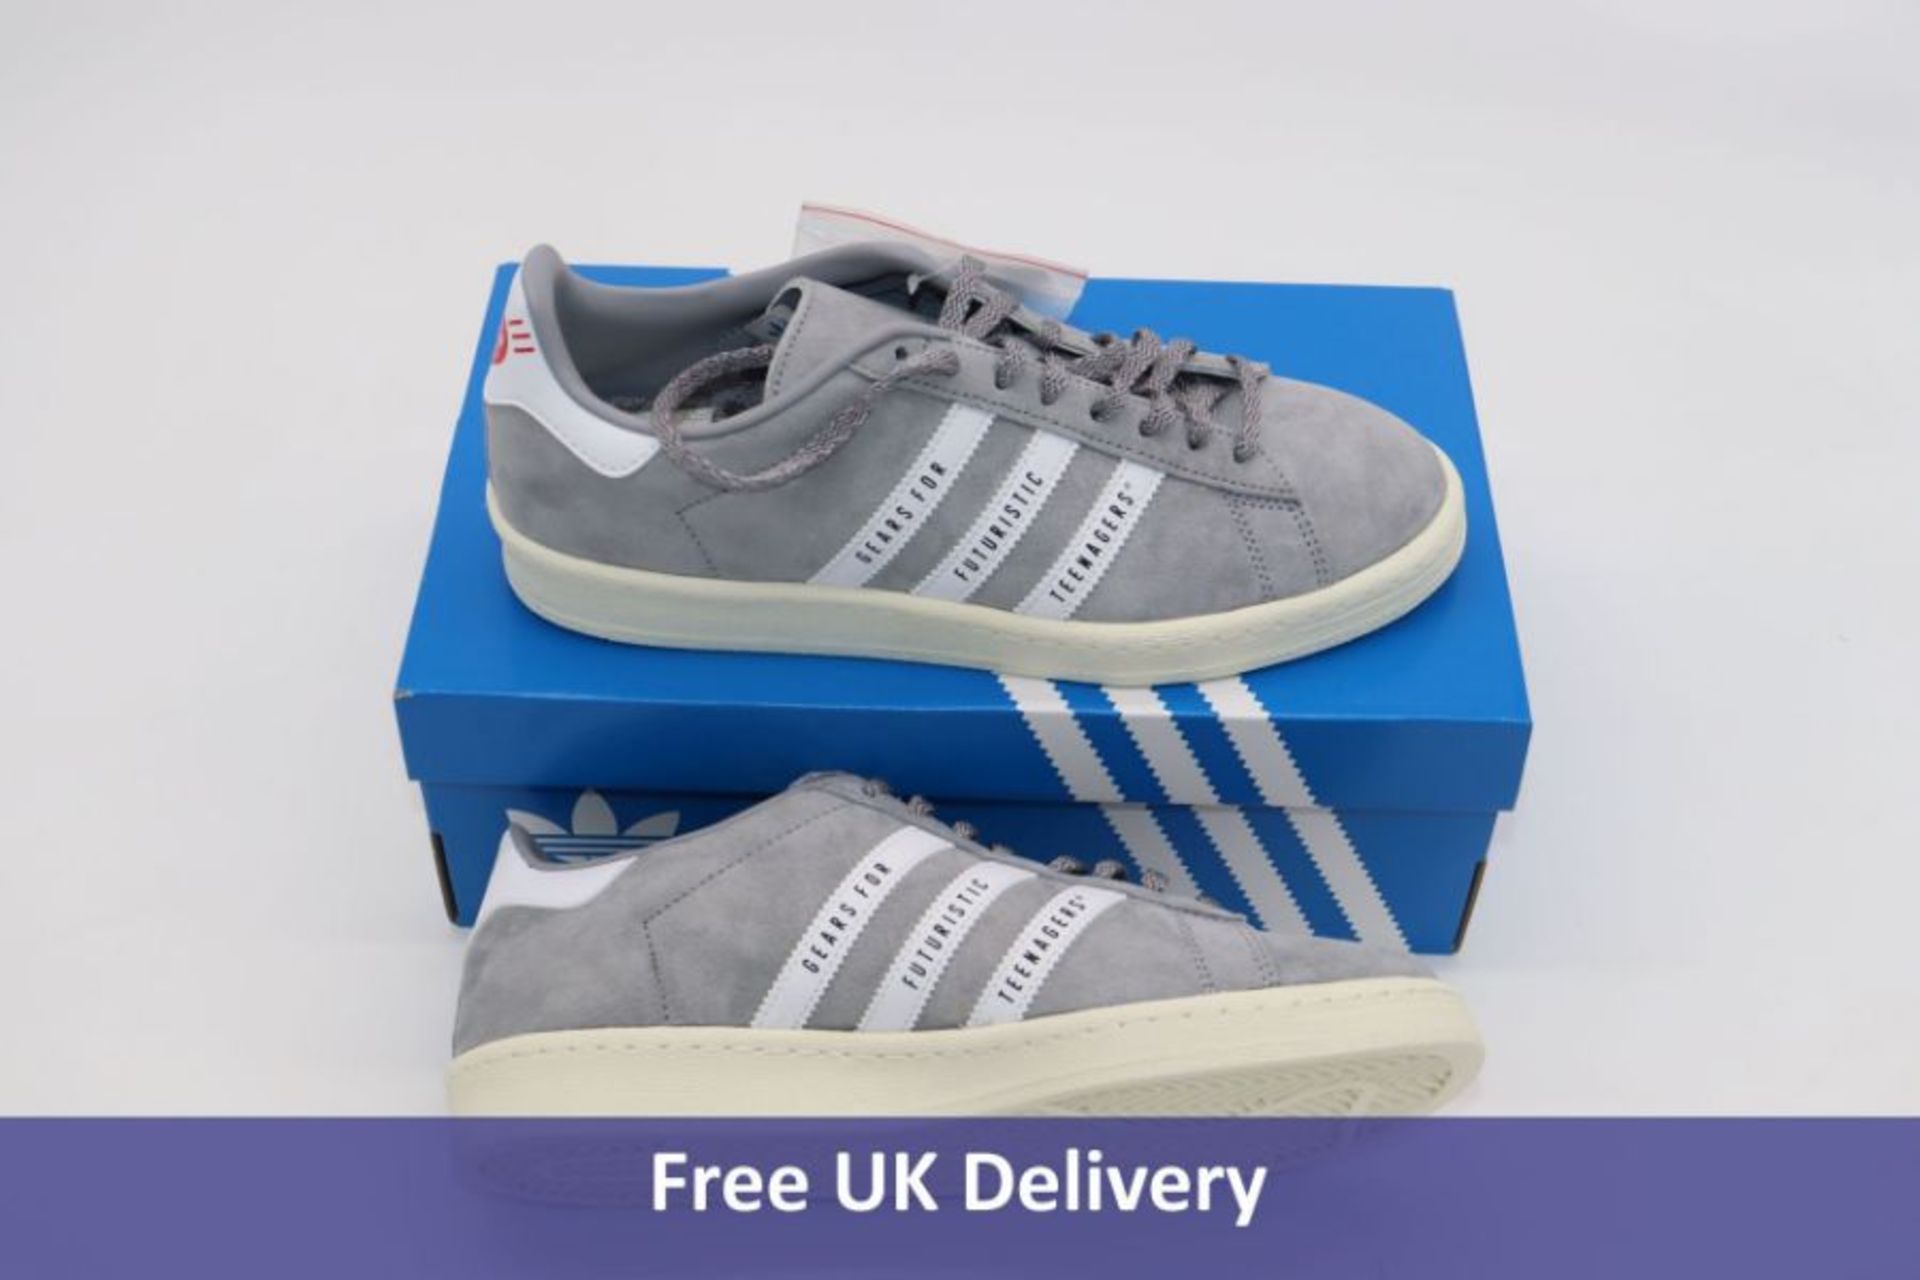 Adidas X Human Made Campus Trainers, Light Onix/Off White, UK 7.5